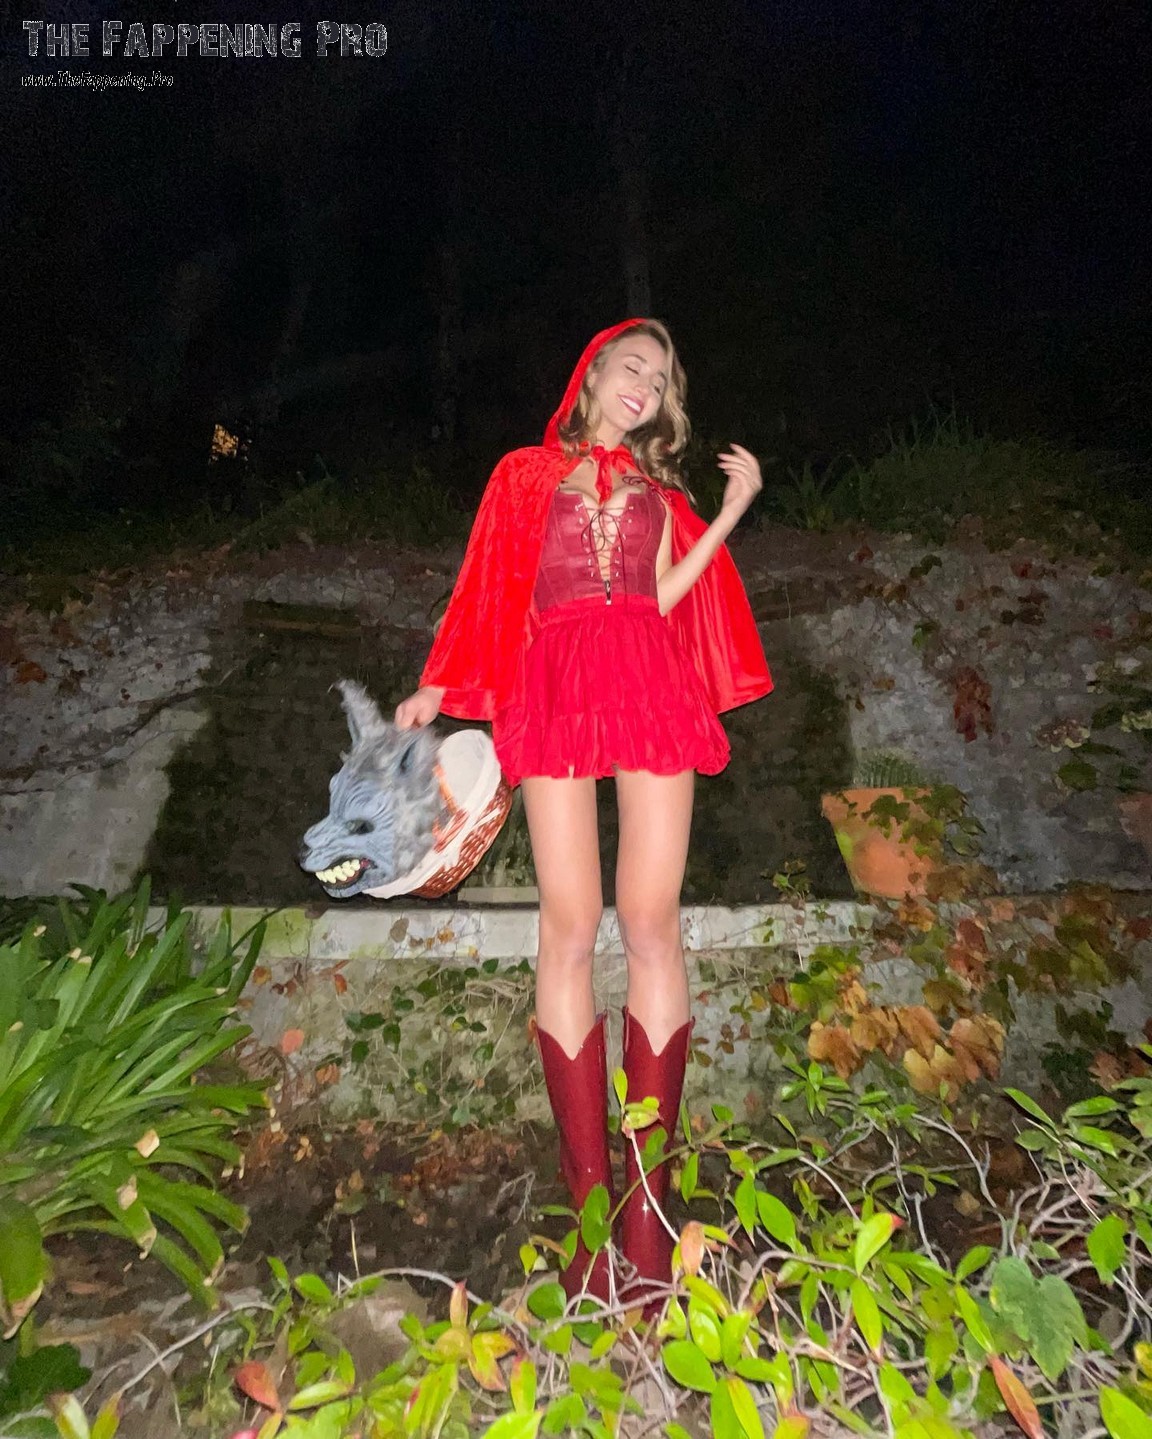 Actress and girlfriend of Casey Affleck, Caylee Cowan, wowed fans with her sizzling hot Halloween 2023 photos. The 25-year-old beauty rocked multiple costumes, including a sultry Little Red Riding Hood with a short skirt and corset, showing off her legs and cleavage. She later turned heads at a wild animal party, looking even sexier in her second costume. See all the jaw-dropping looks on Caylee's Instagram! #Halloween2023 #CayleeCowan #CaseyAffleck #SexyCostumes